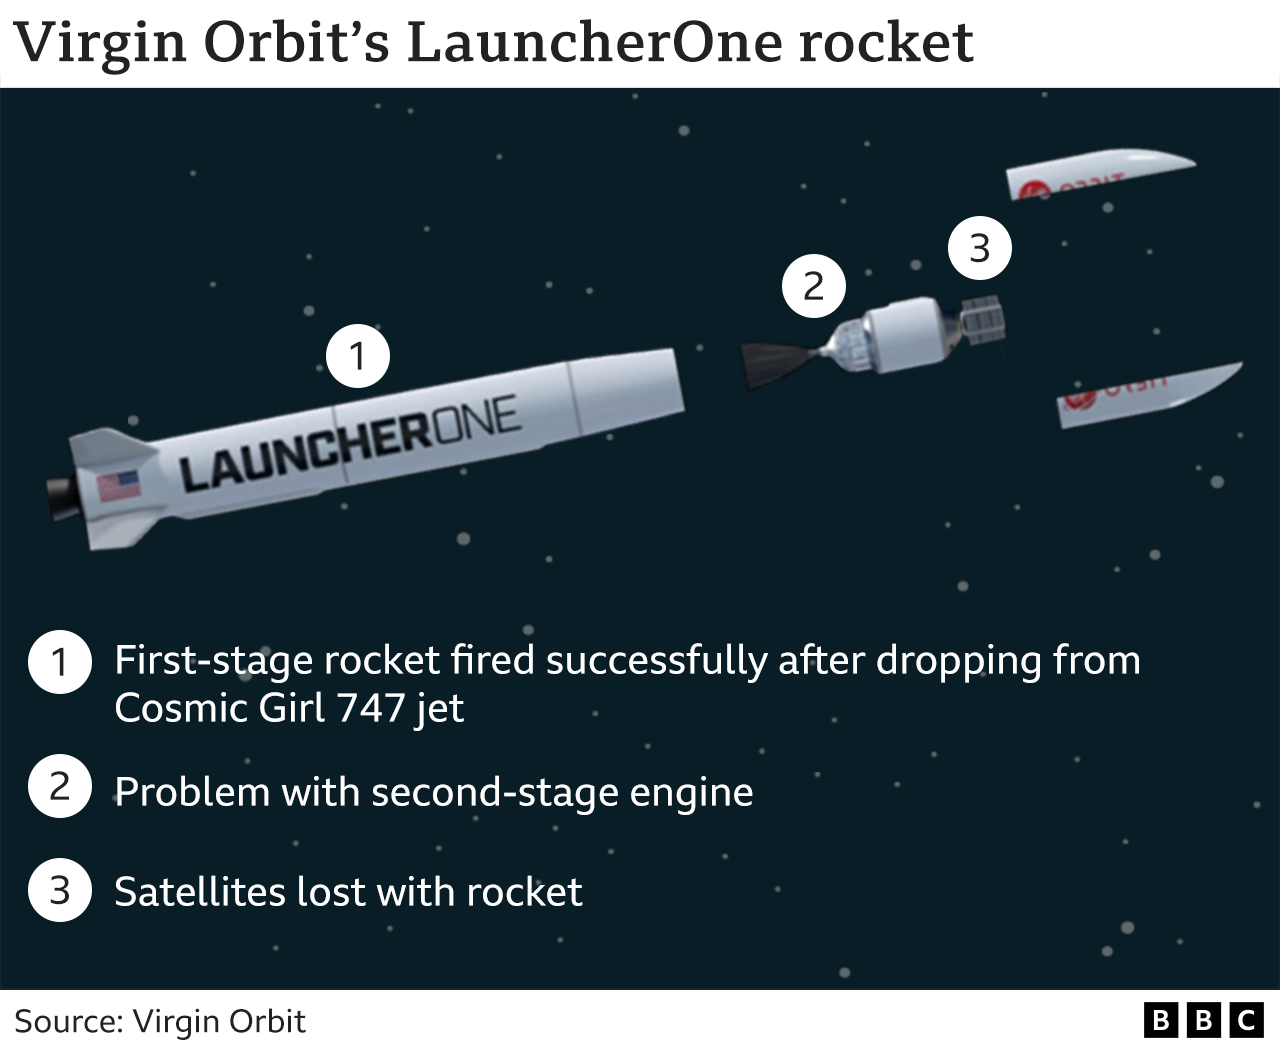 Graphic showing stages of rocket. 1. First-stage rocket fired successfully after dropping from Cosmic Girl 747 jet. 2. Problem with second-stage engine. 3. Satellites lost with rocket